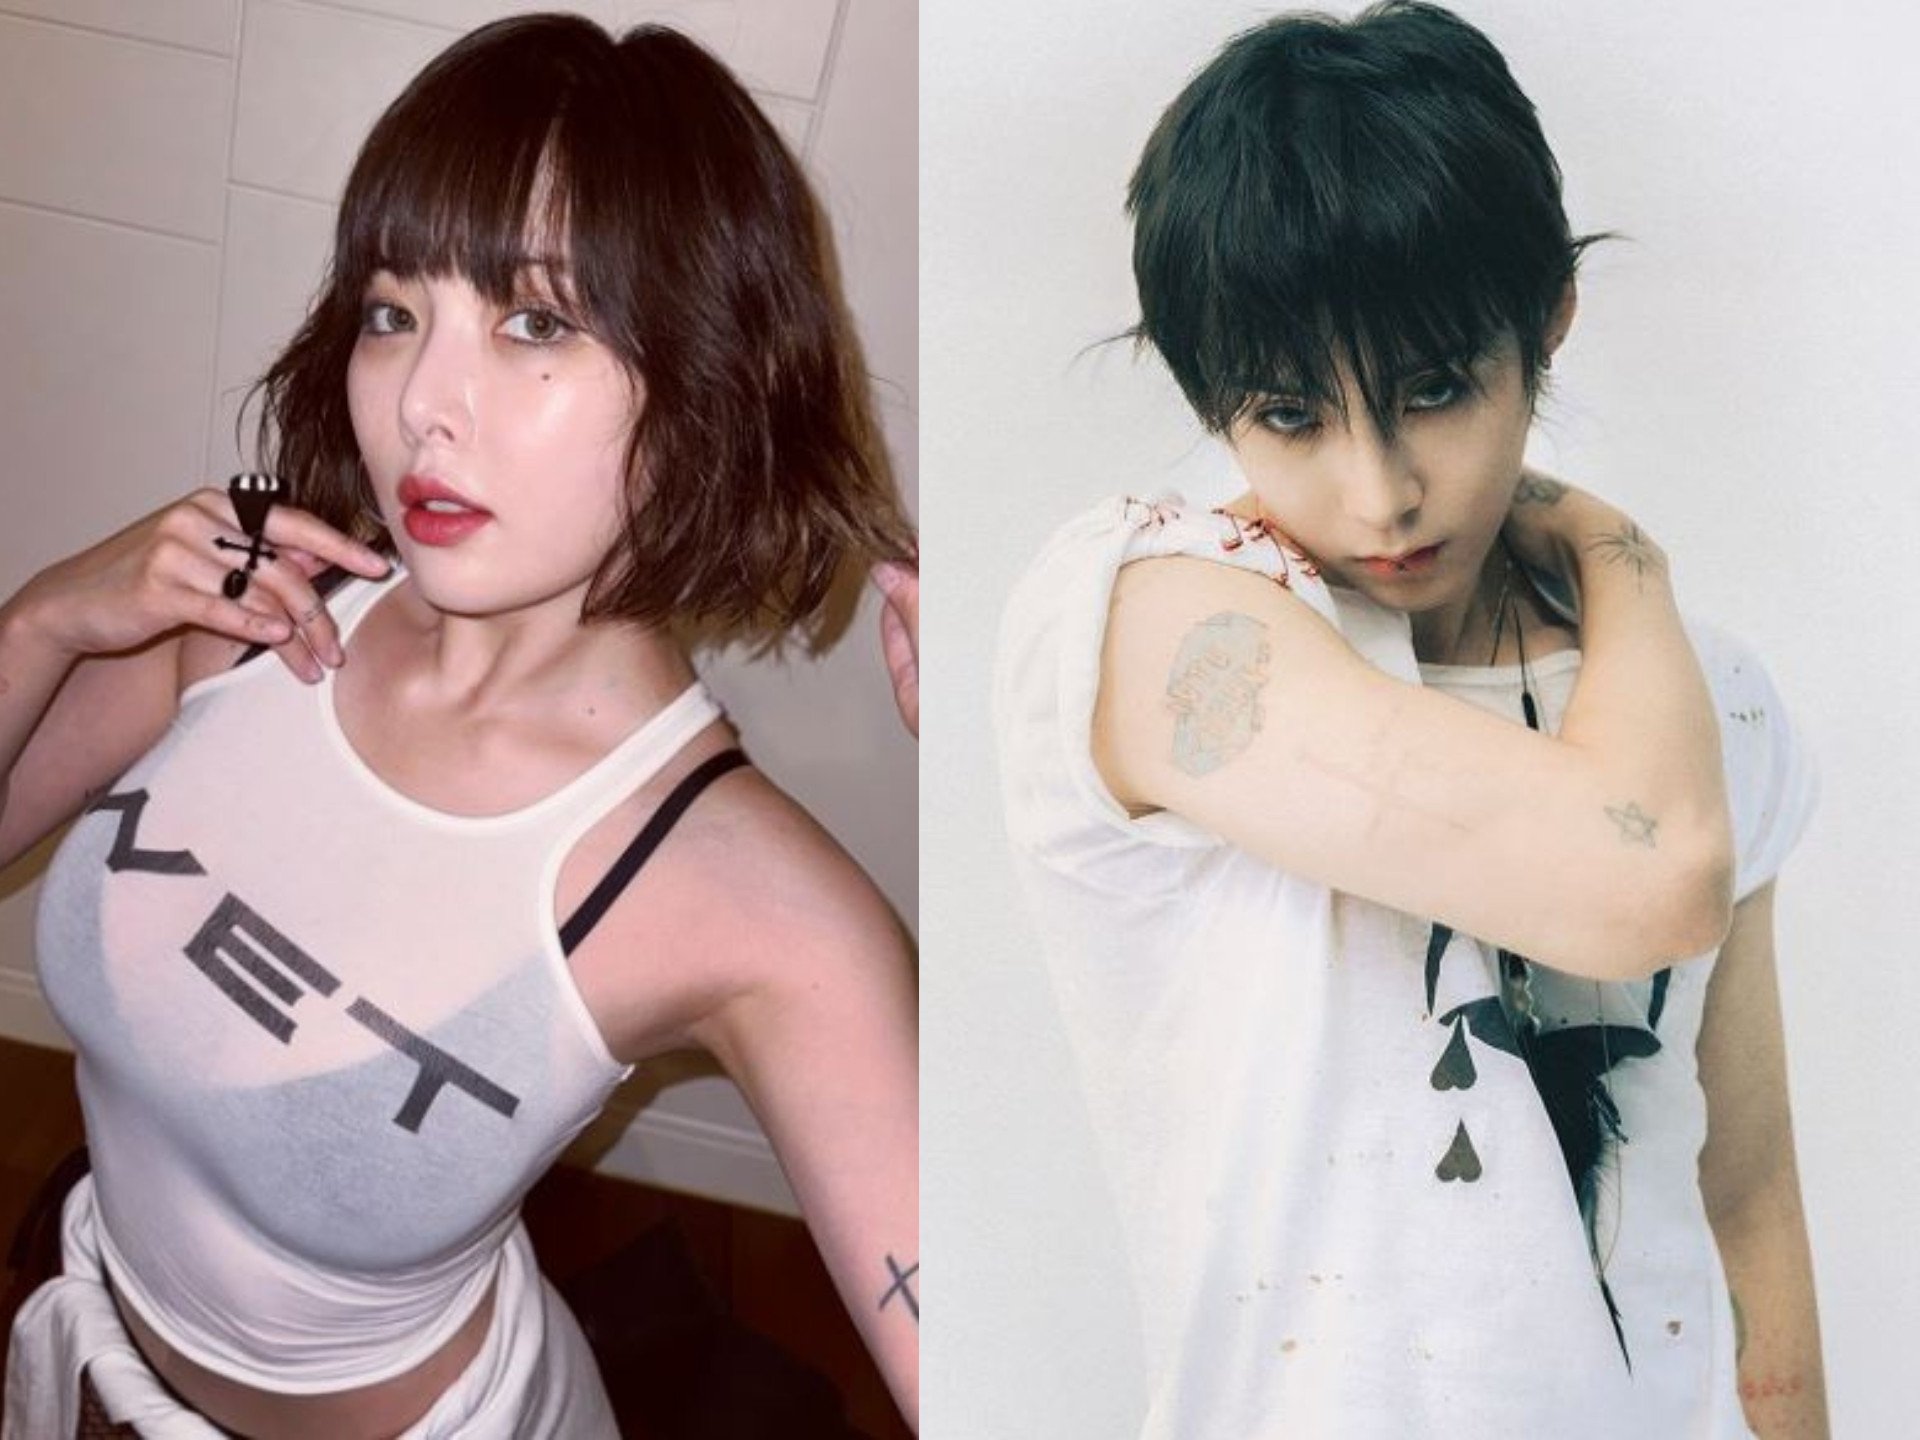 The end of Dawn and HyunA? South Korean singer marries Yong Jun Hyung in October